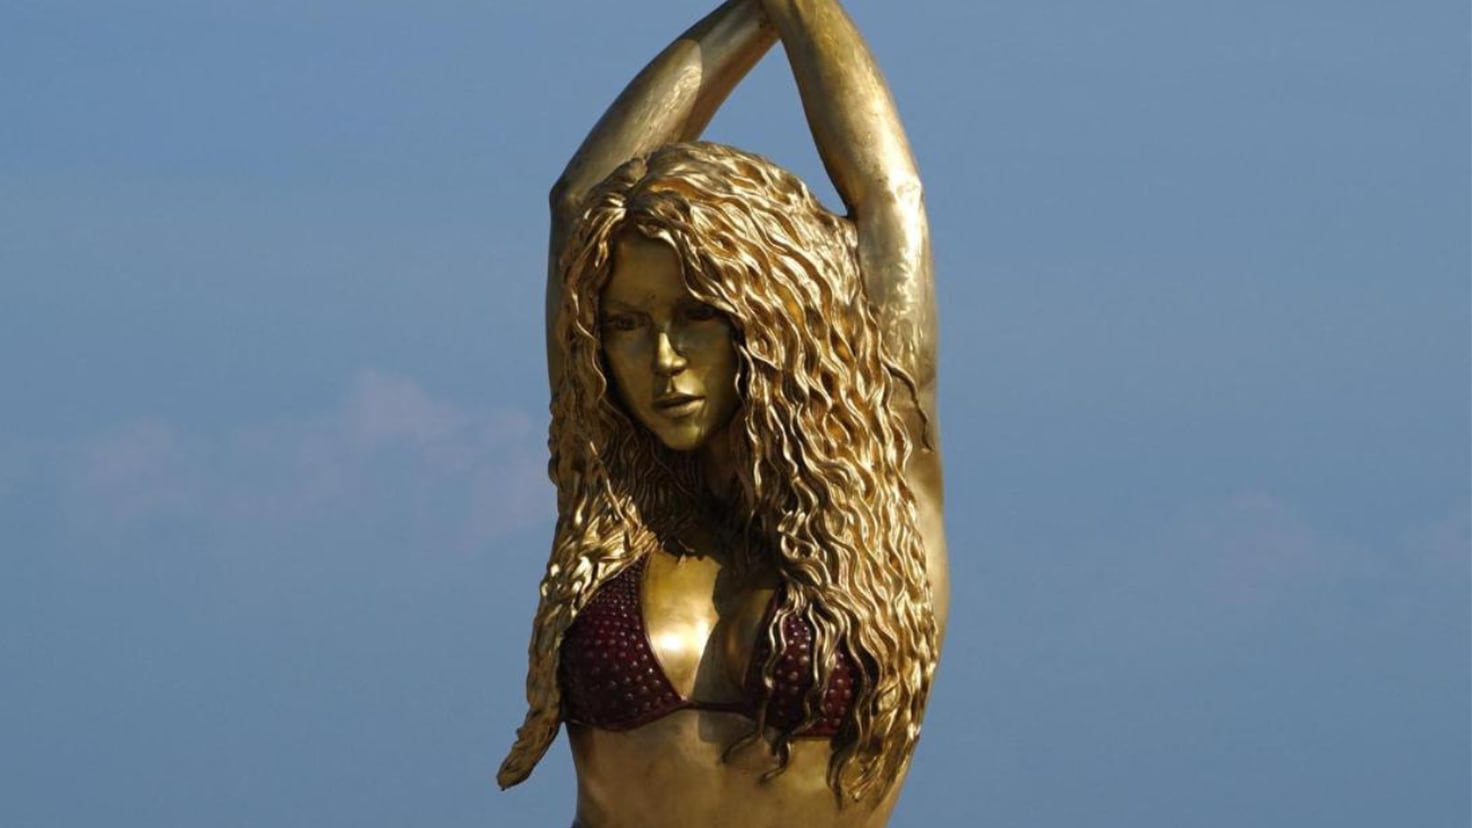 The viral spelling mistake on the Shakira statue
